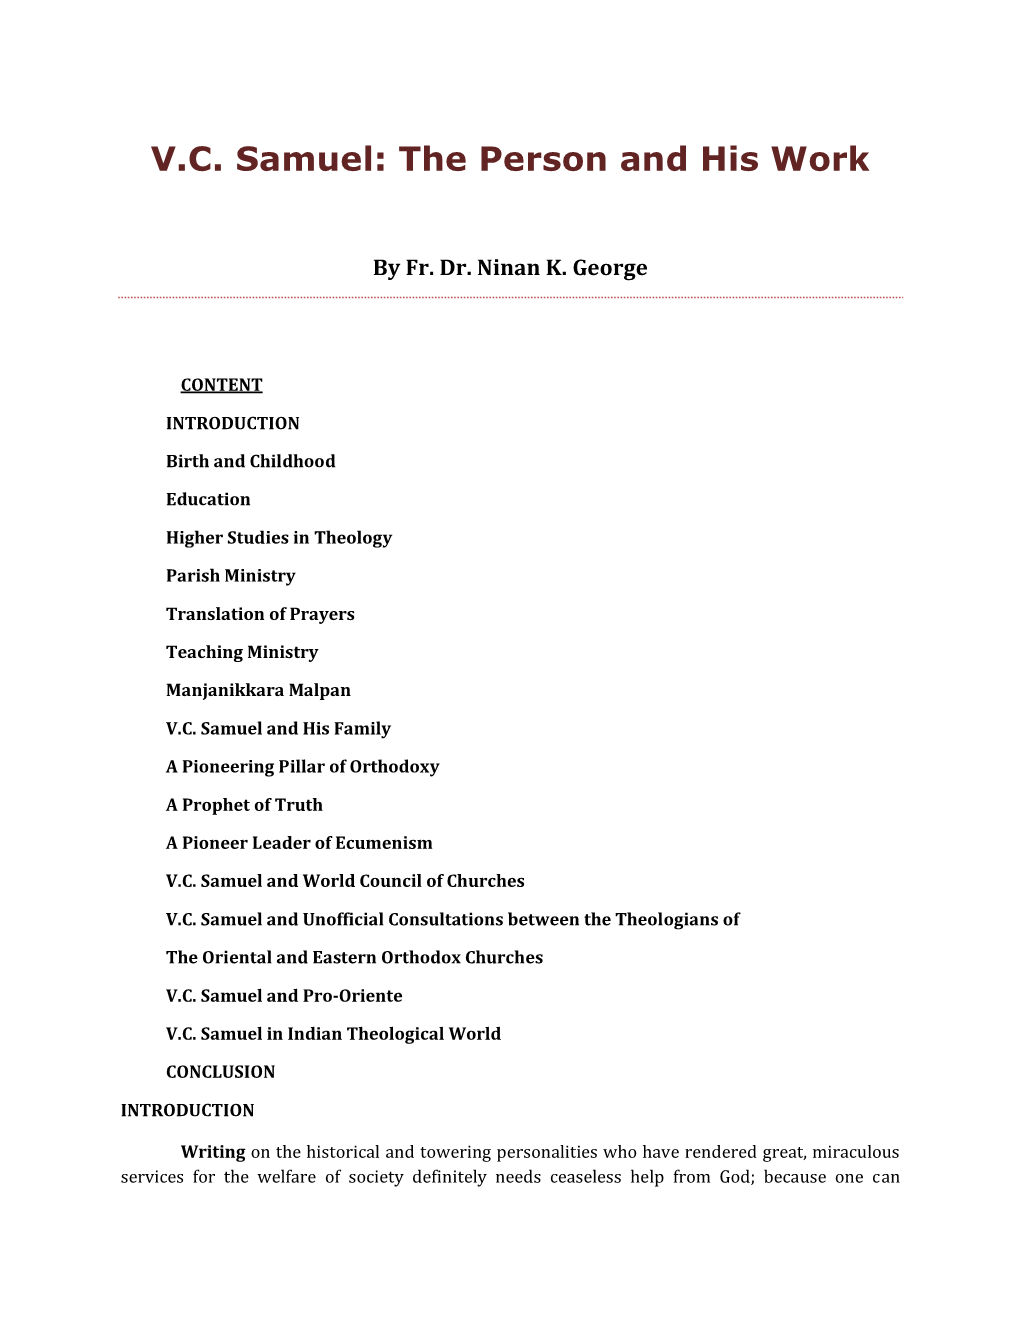 V.C. Samuel: the Person and His Work